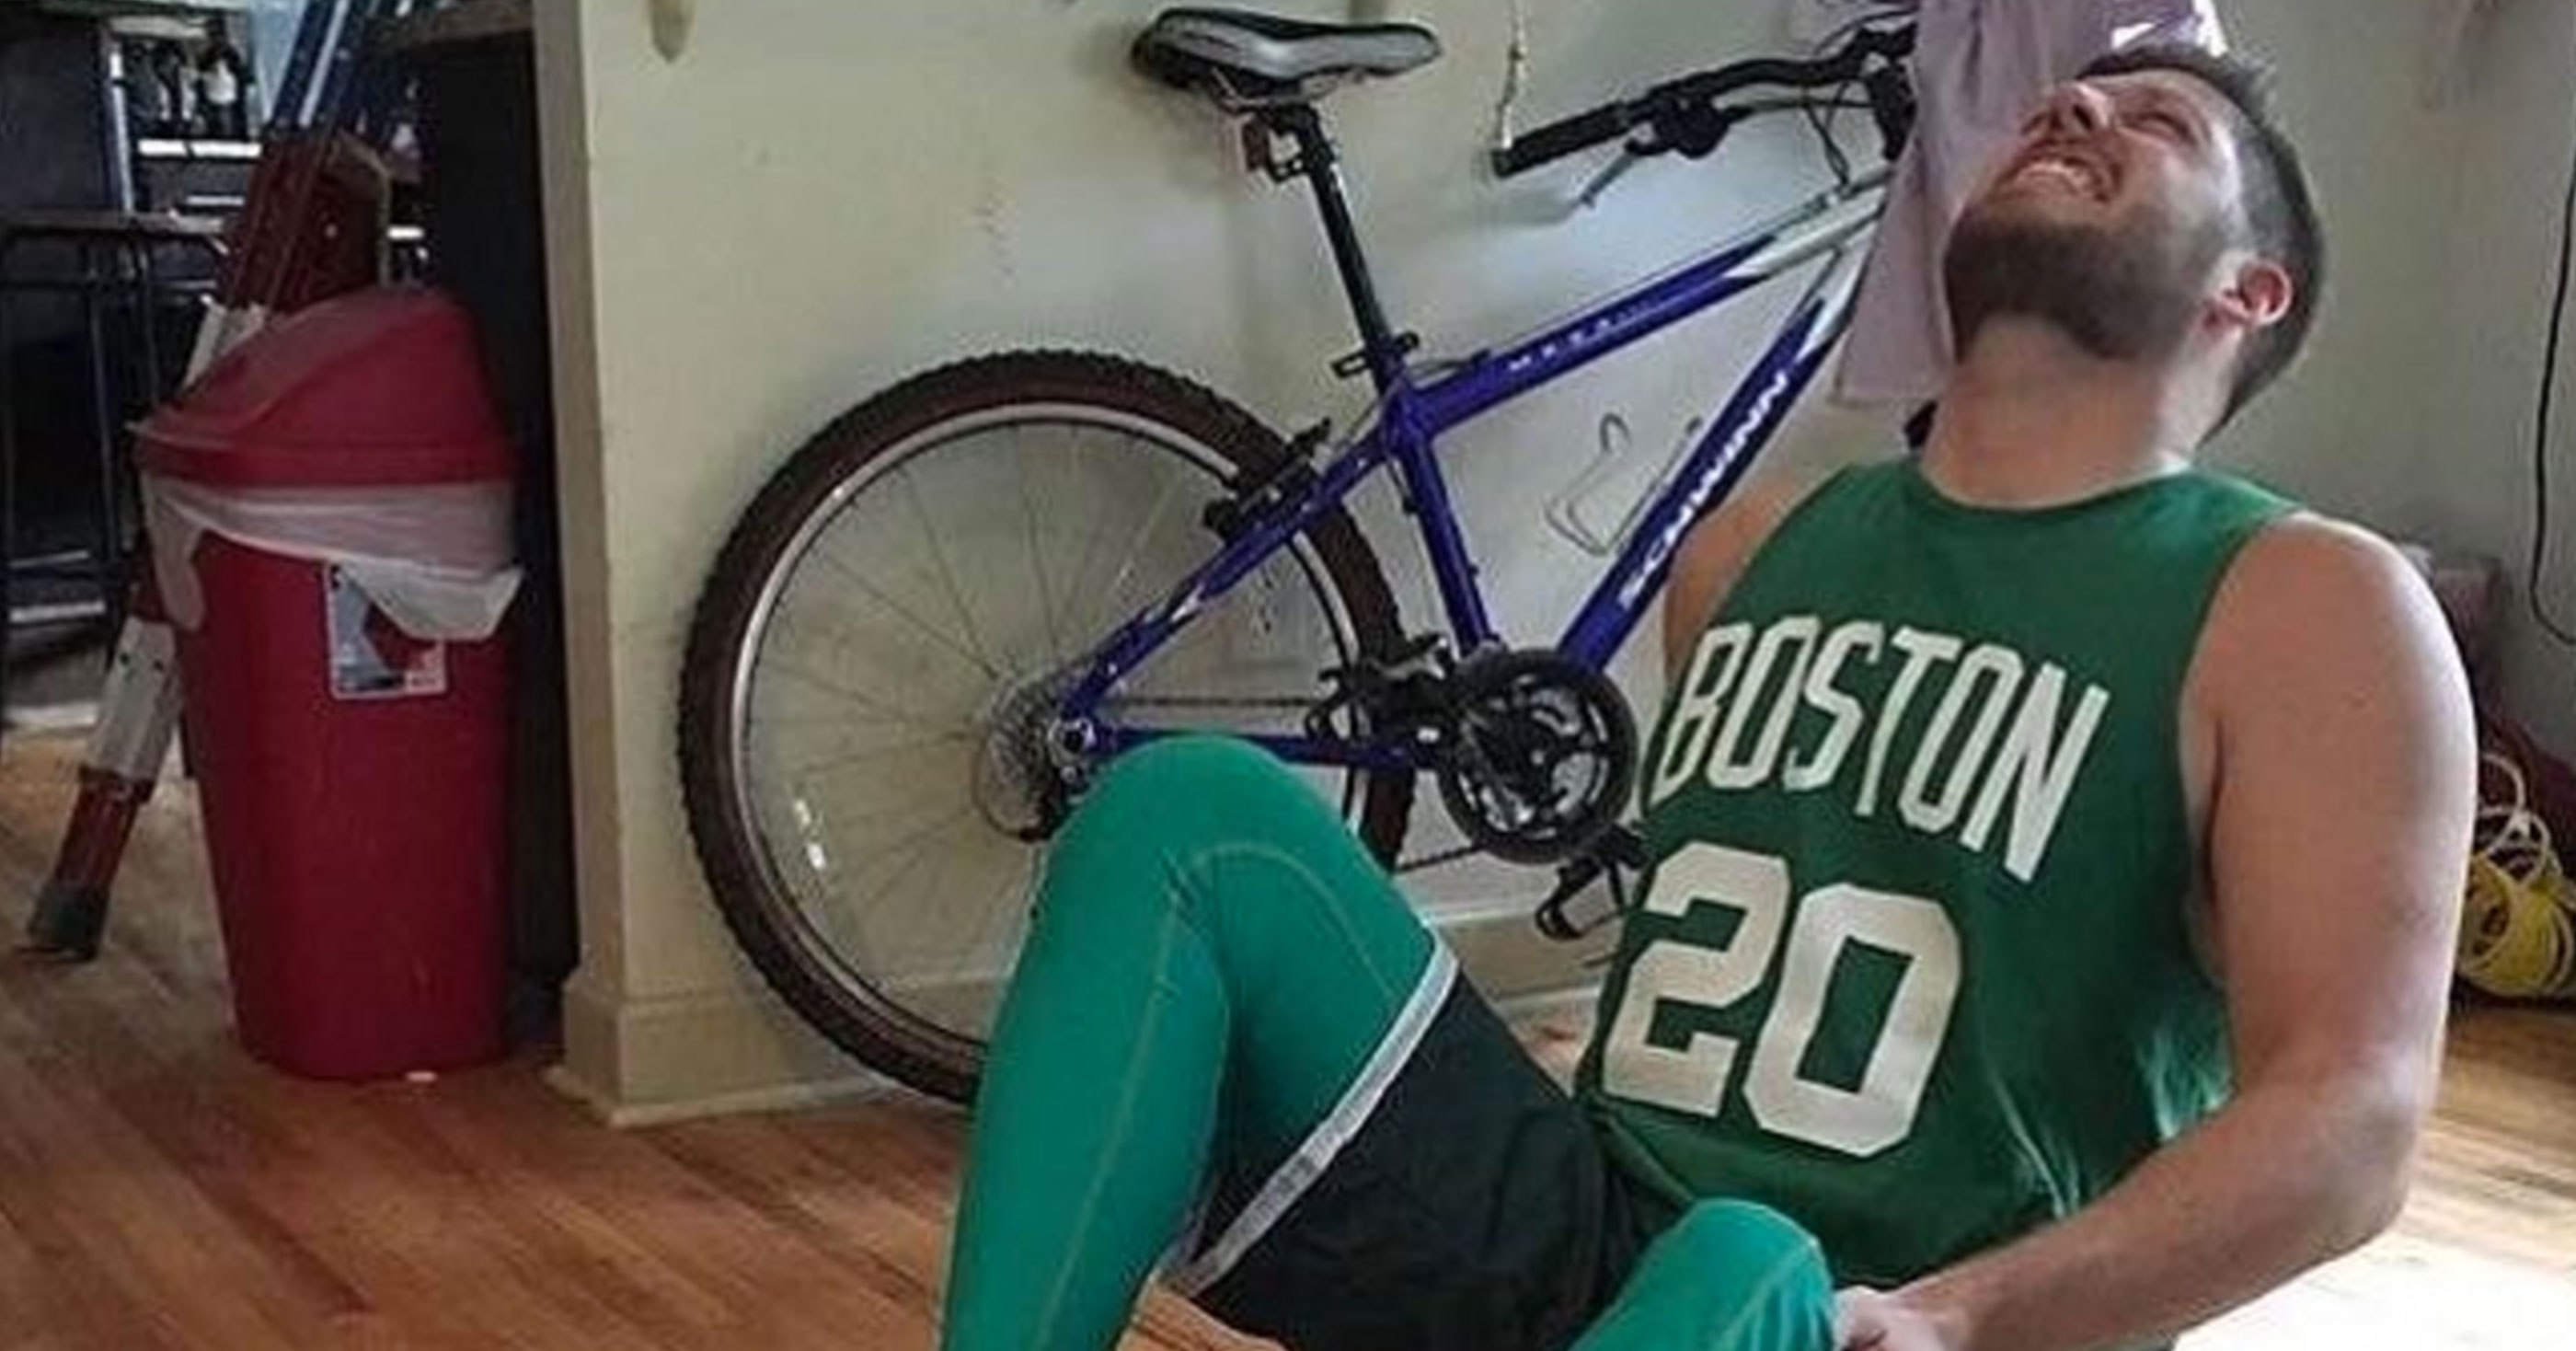 Man Lost His Leg To Cancer, So He Went As Gordon Hayward For Halloween (PIC)